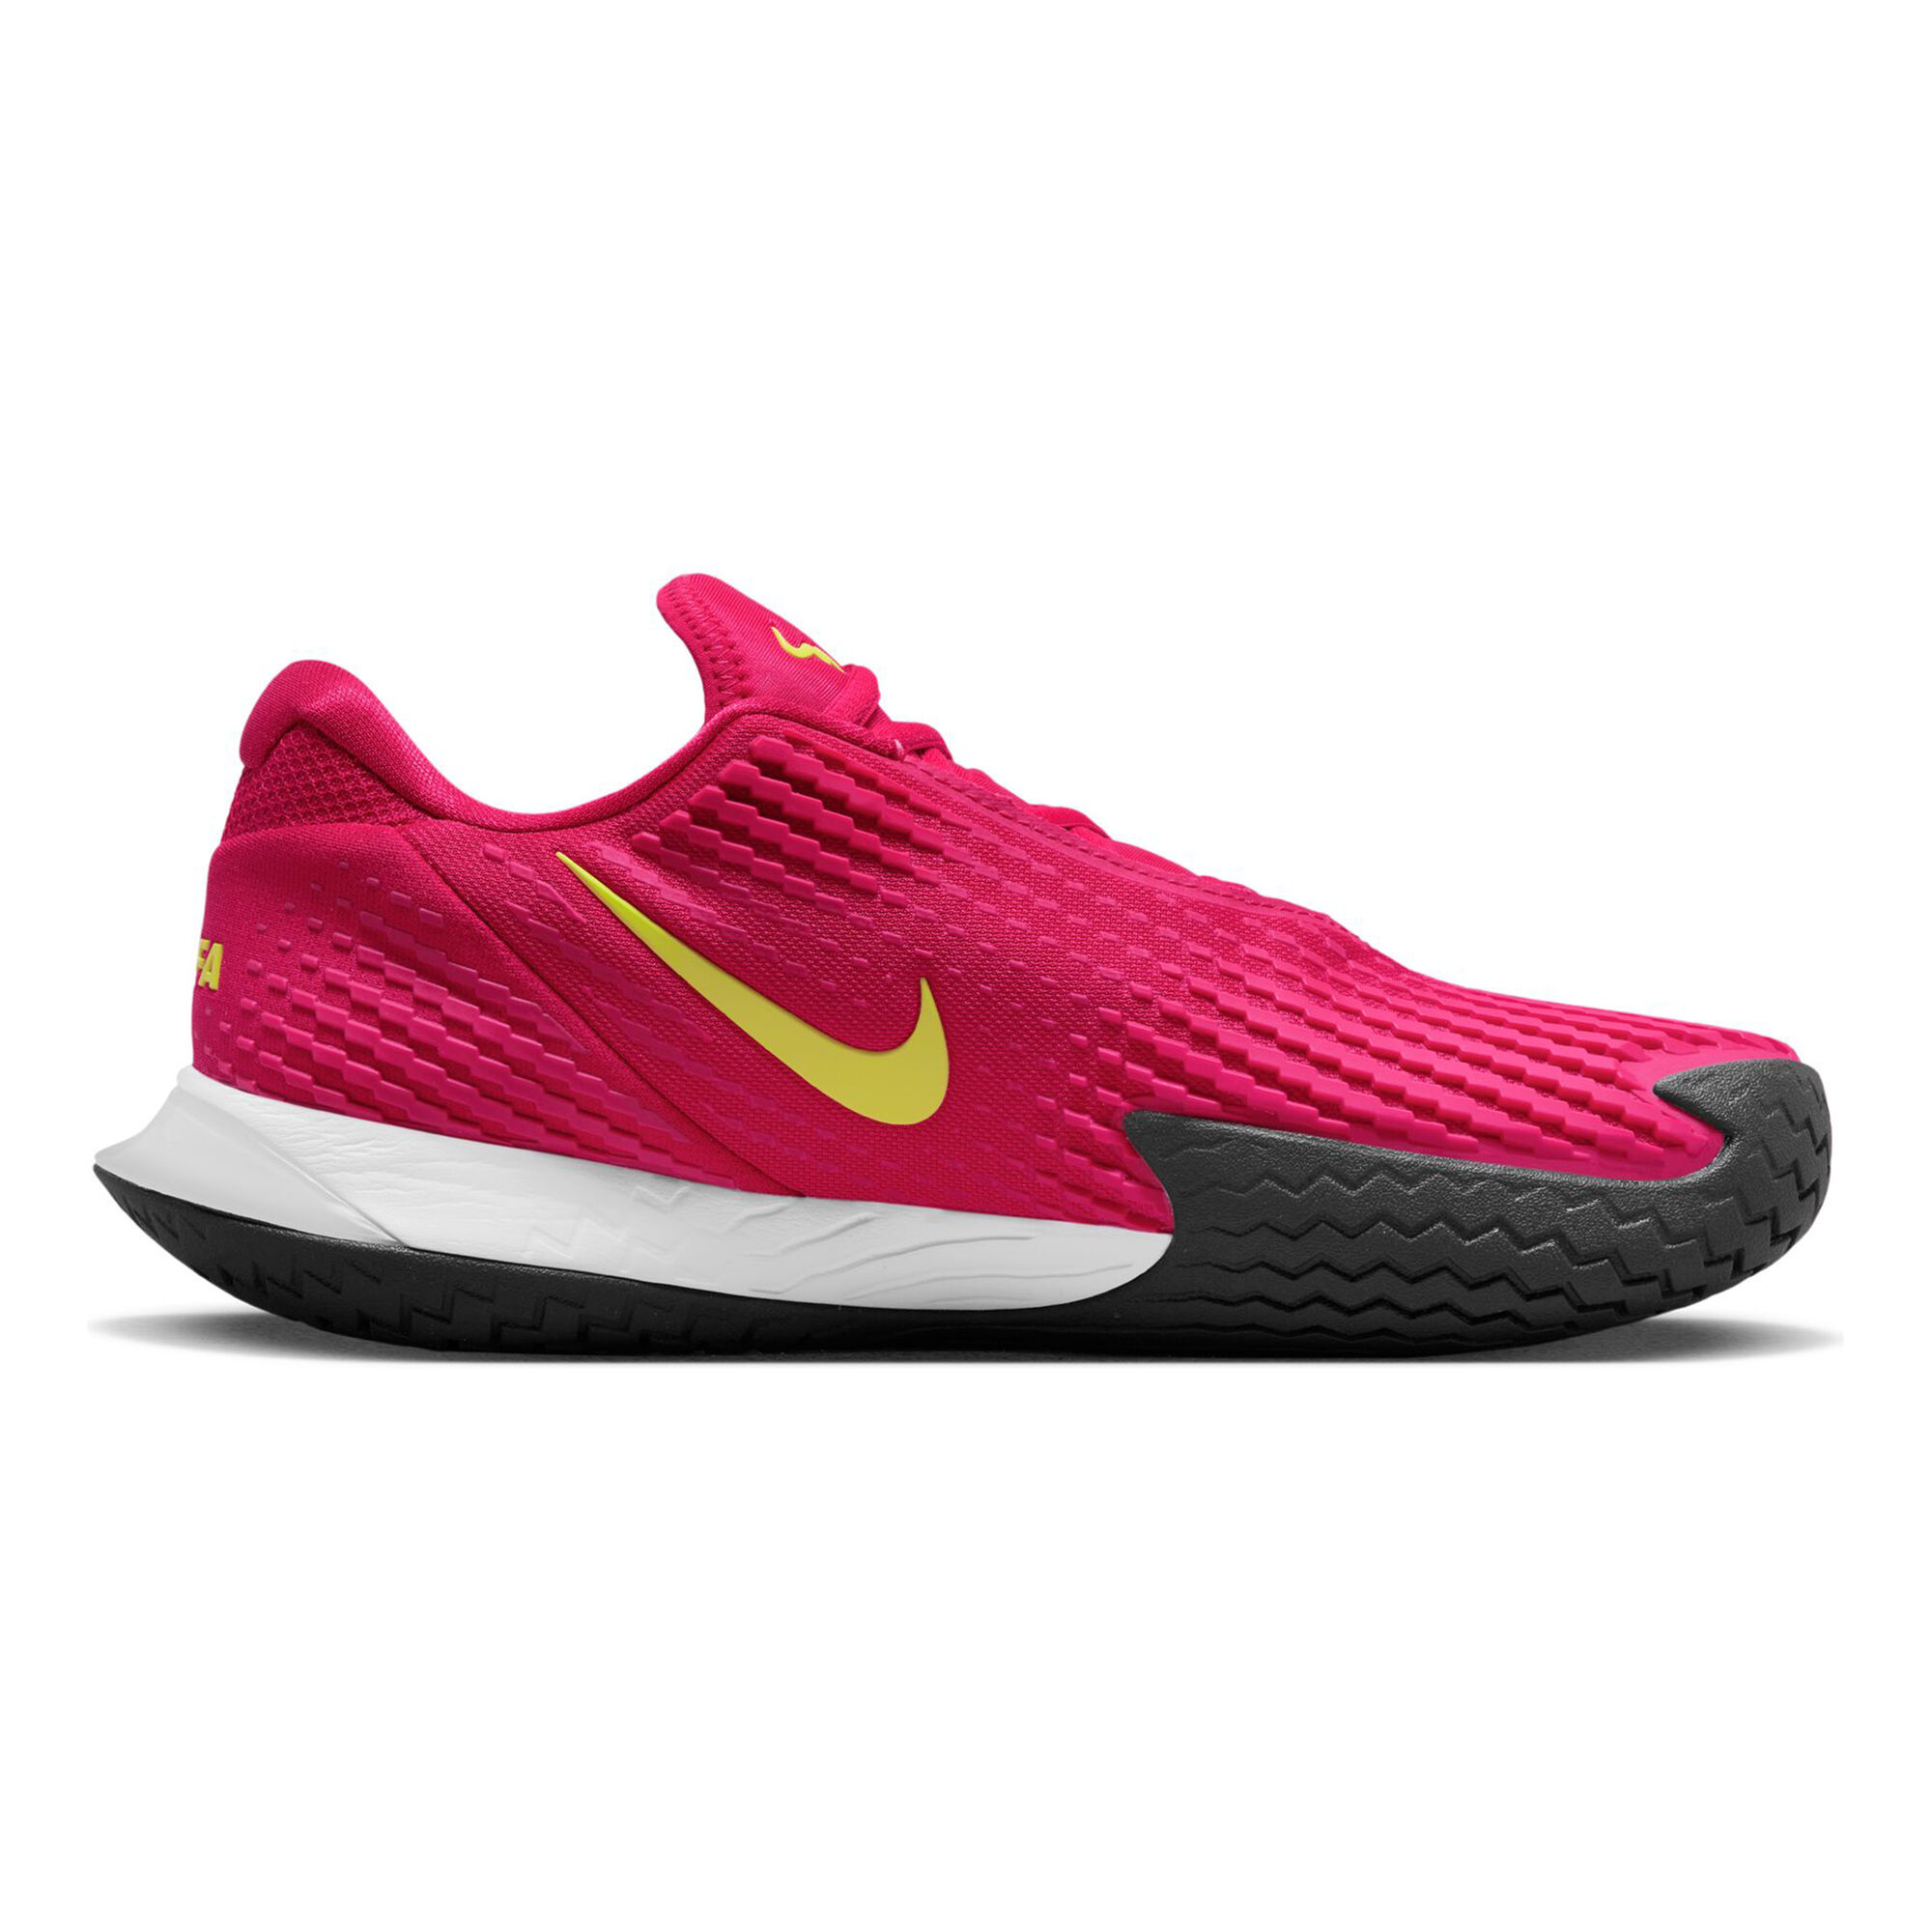 count anxiety Encyclopedia buy Nike Zoom Vapor Cage 4 Rafa All Court Shoe Men - Pink, Yellow online |  Tennis-Point